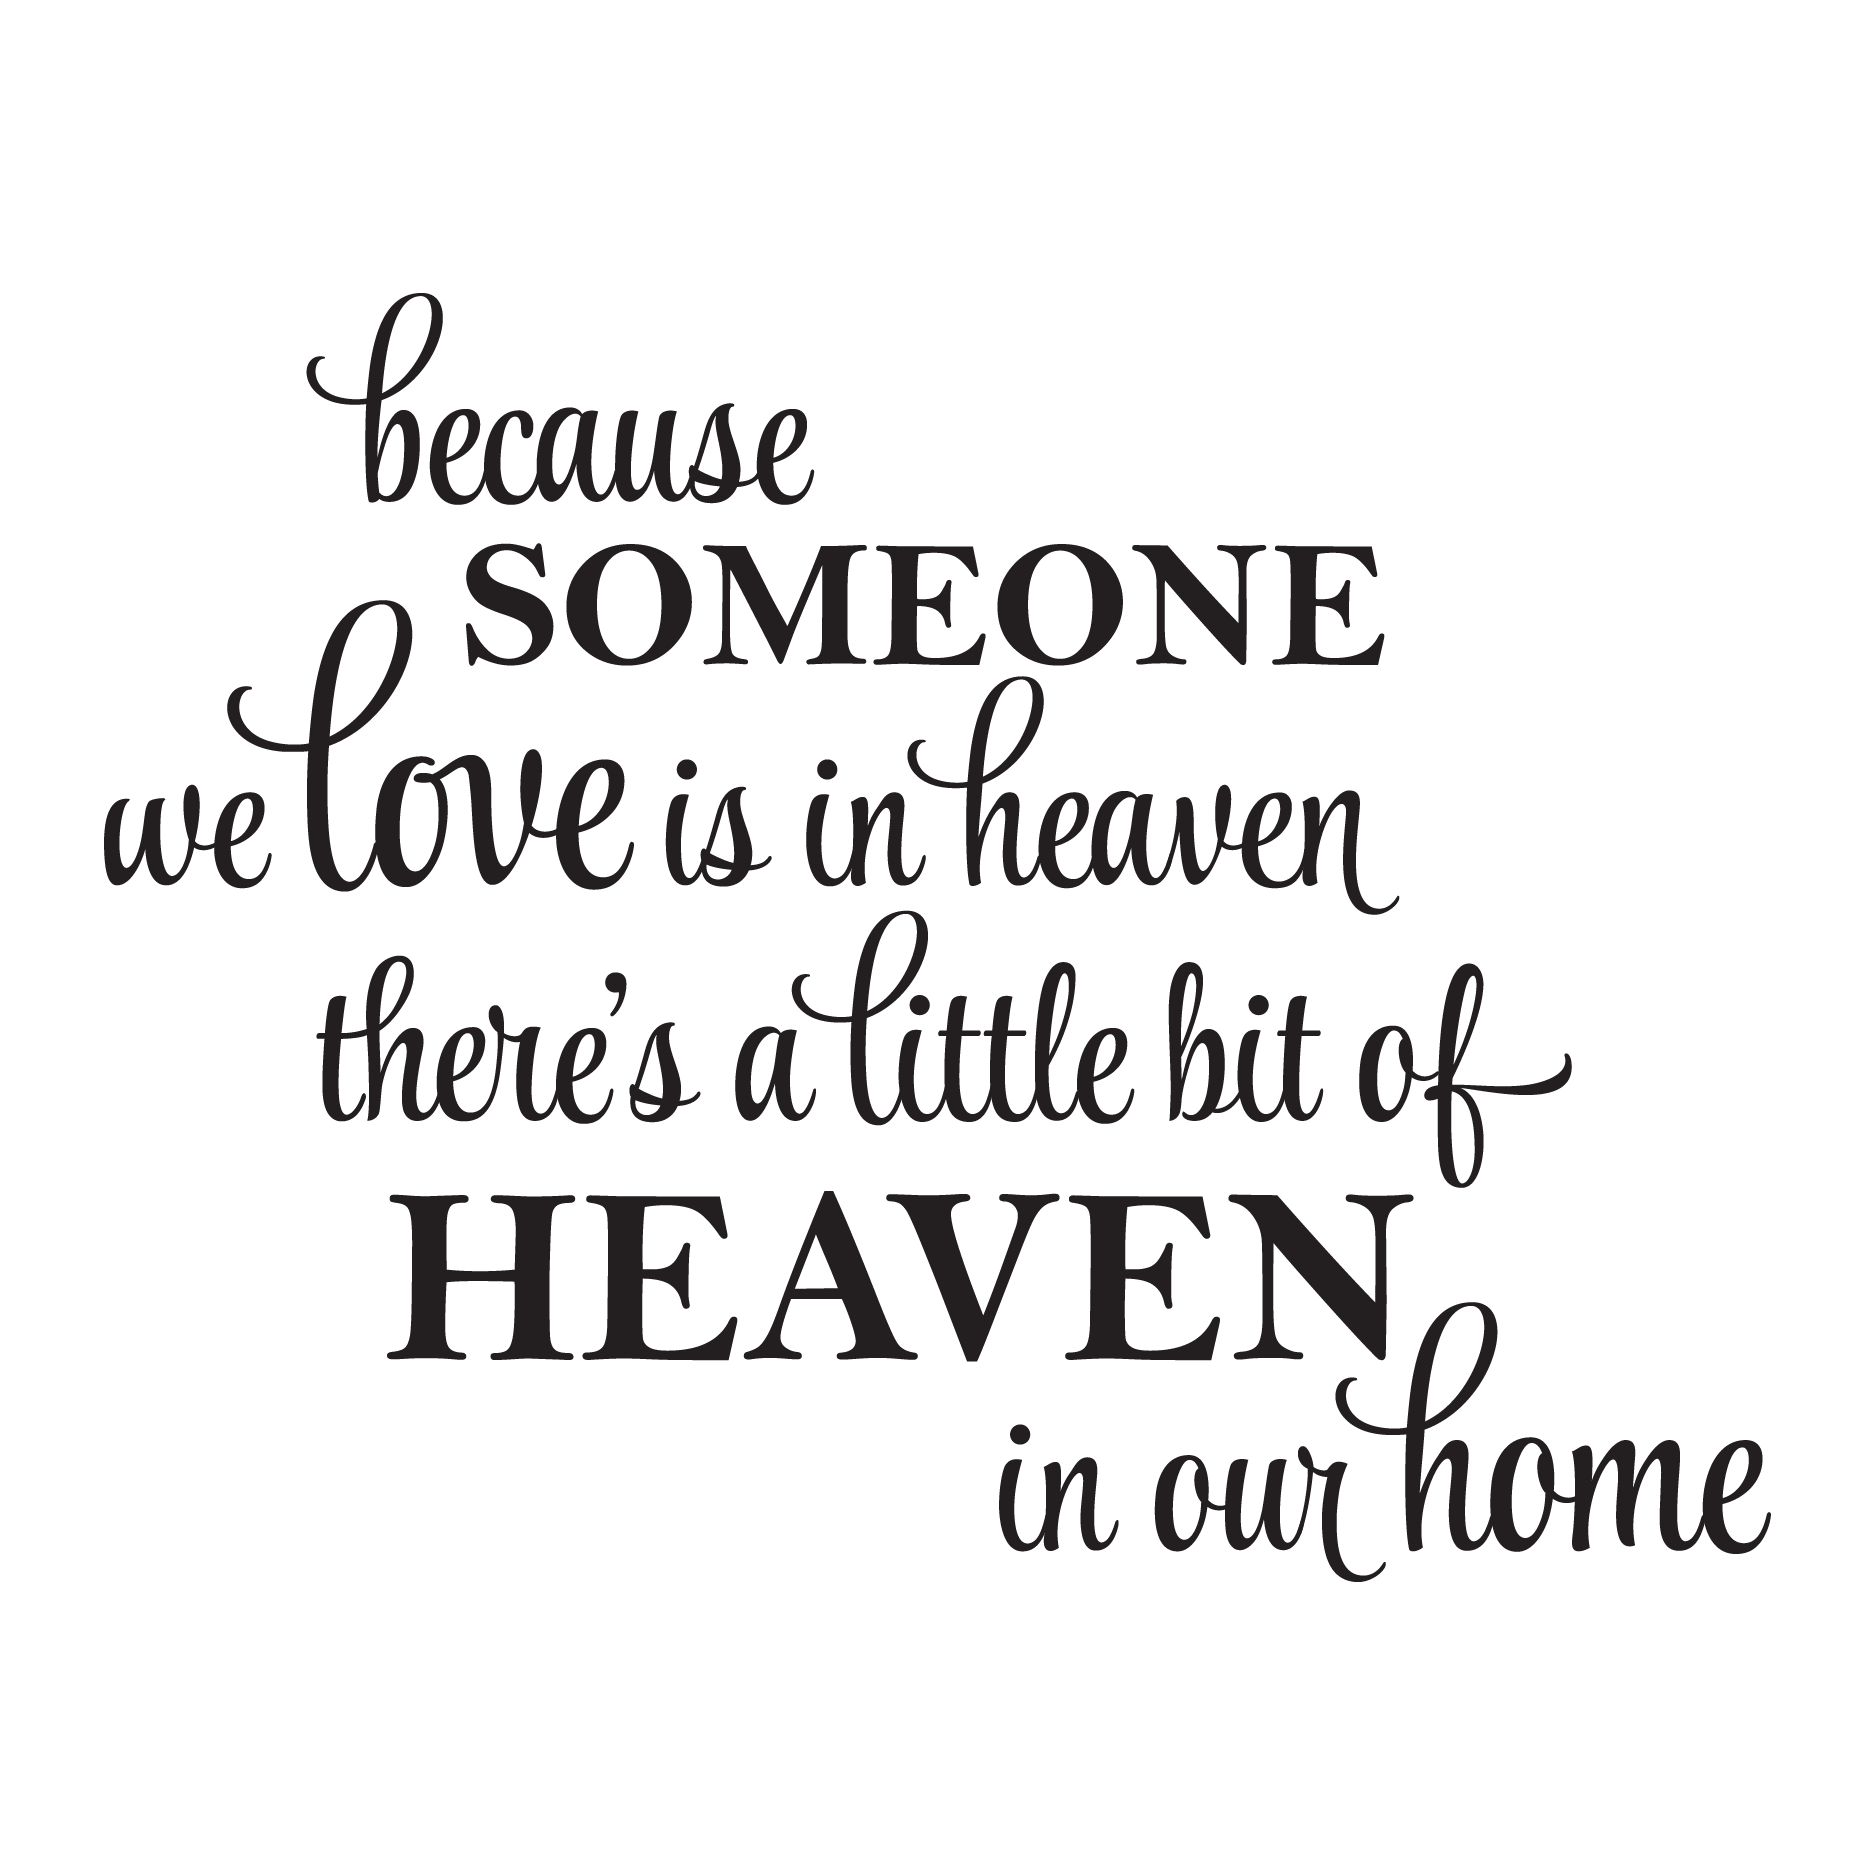 A Little Bit Of Heaven In Our Home Wall Quotes™ Decal | WallQuotes.com